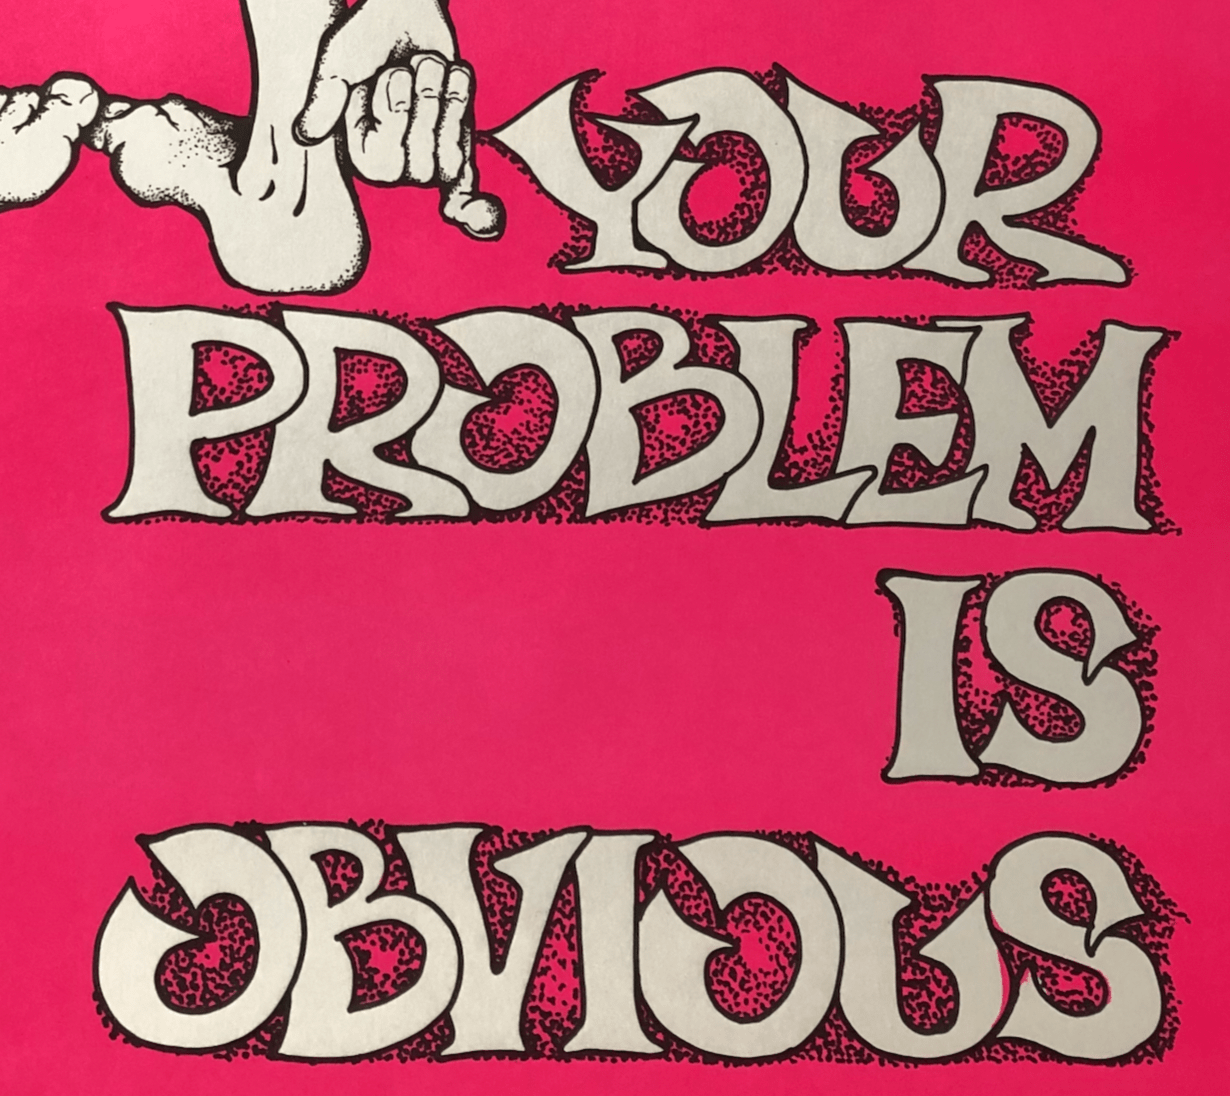 Your Problem is Obvious, 1970s